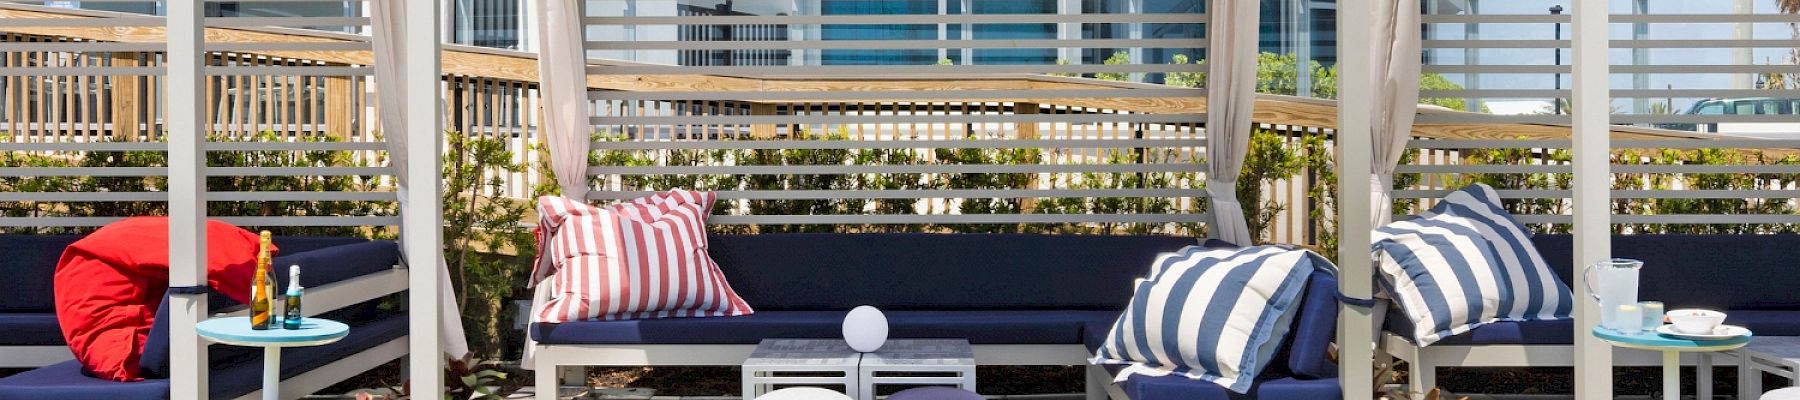 The image shows a modern outdoor cabana setup with seating and colorful cushions next to a building, with the text 